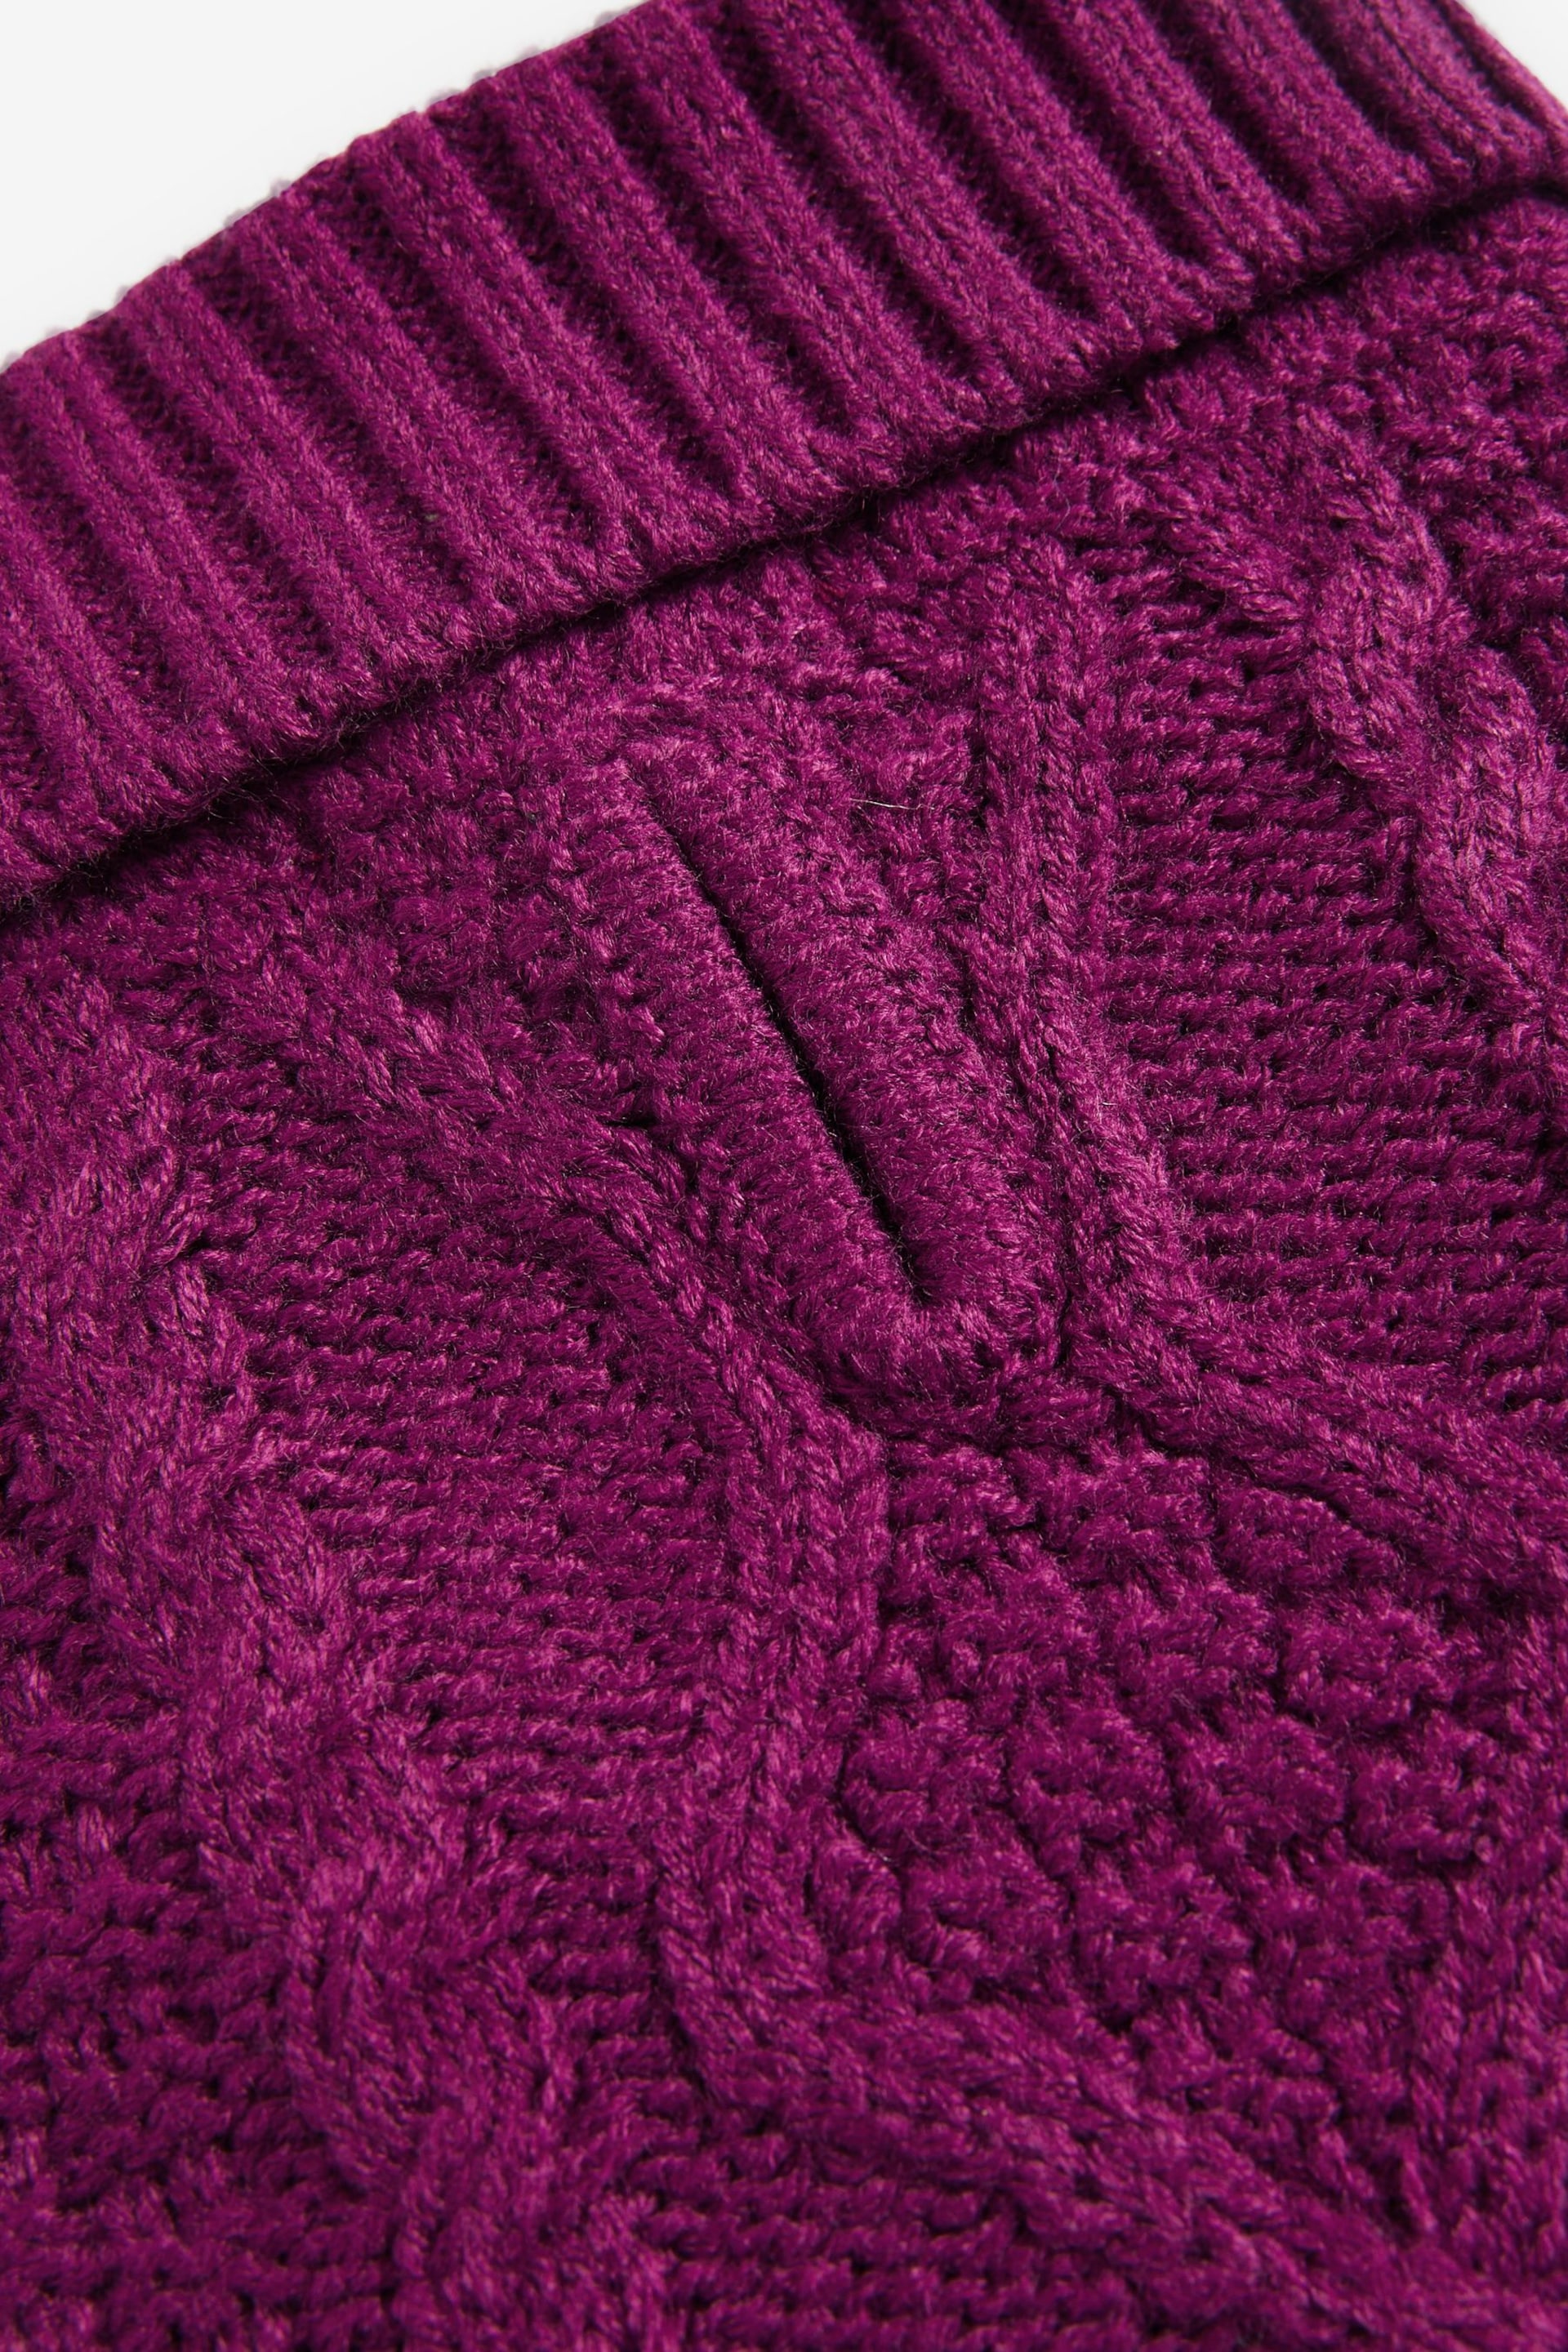 Pink Cable Stitch Dog Jumper - Image 8 of 9